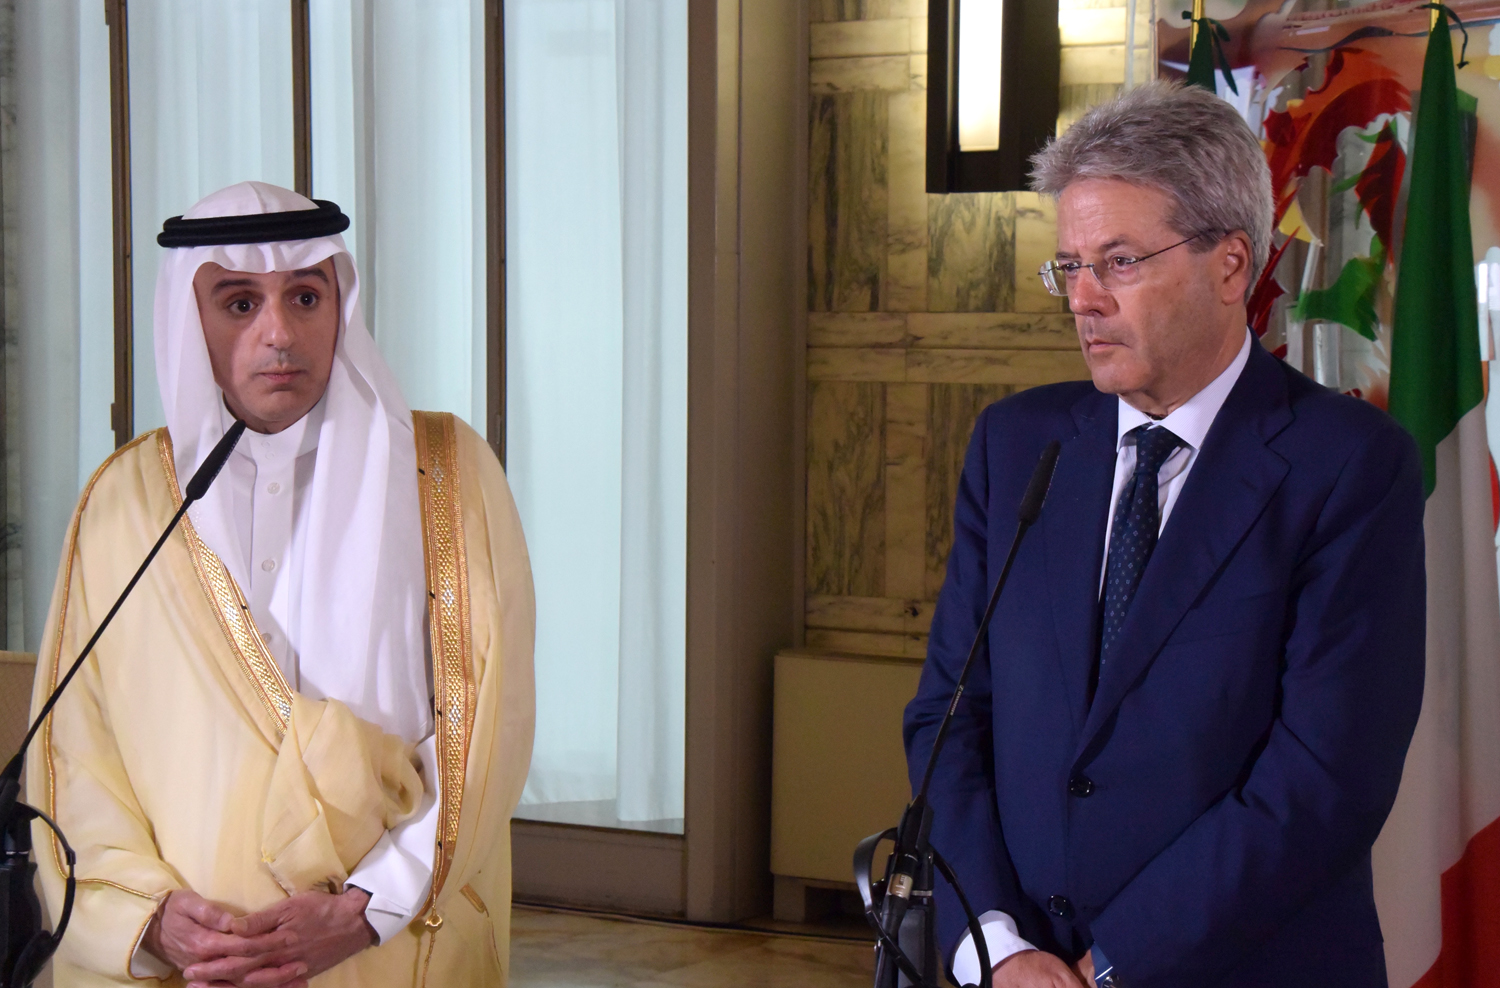 Saudi Foreign Minister Adel Al-Jubeir with his Italian counterpart Paolo Gentiloni